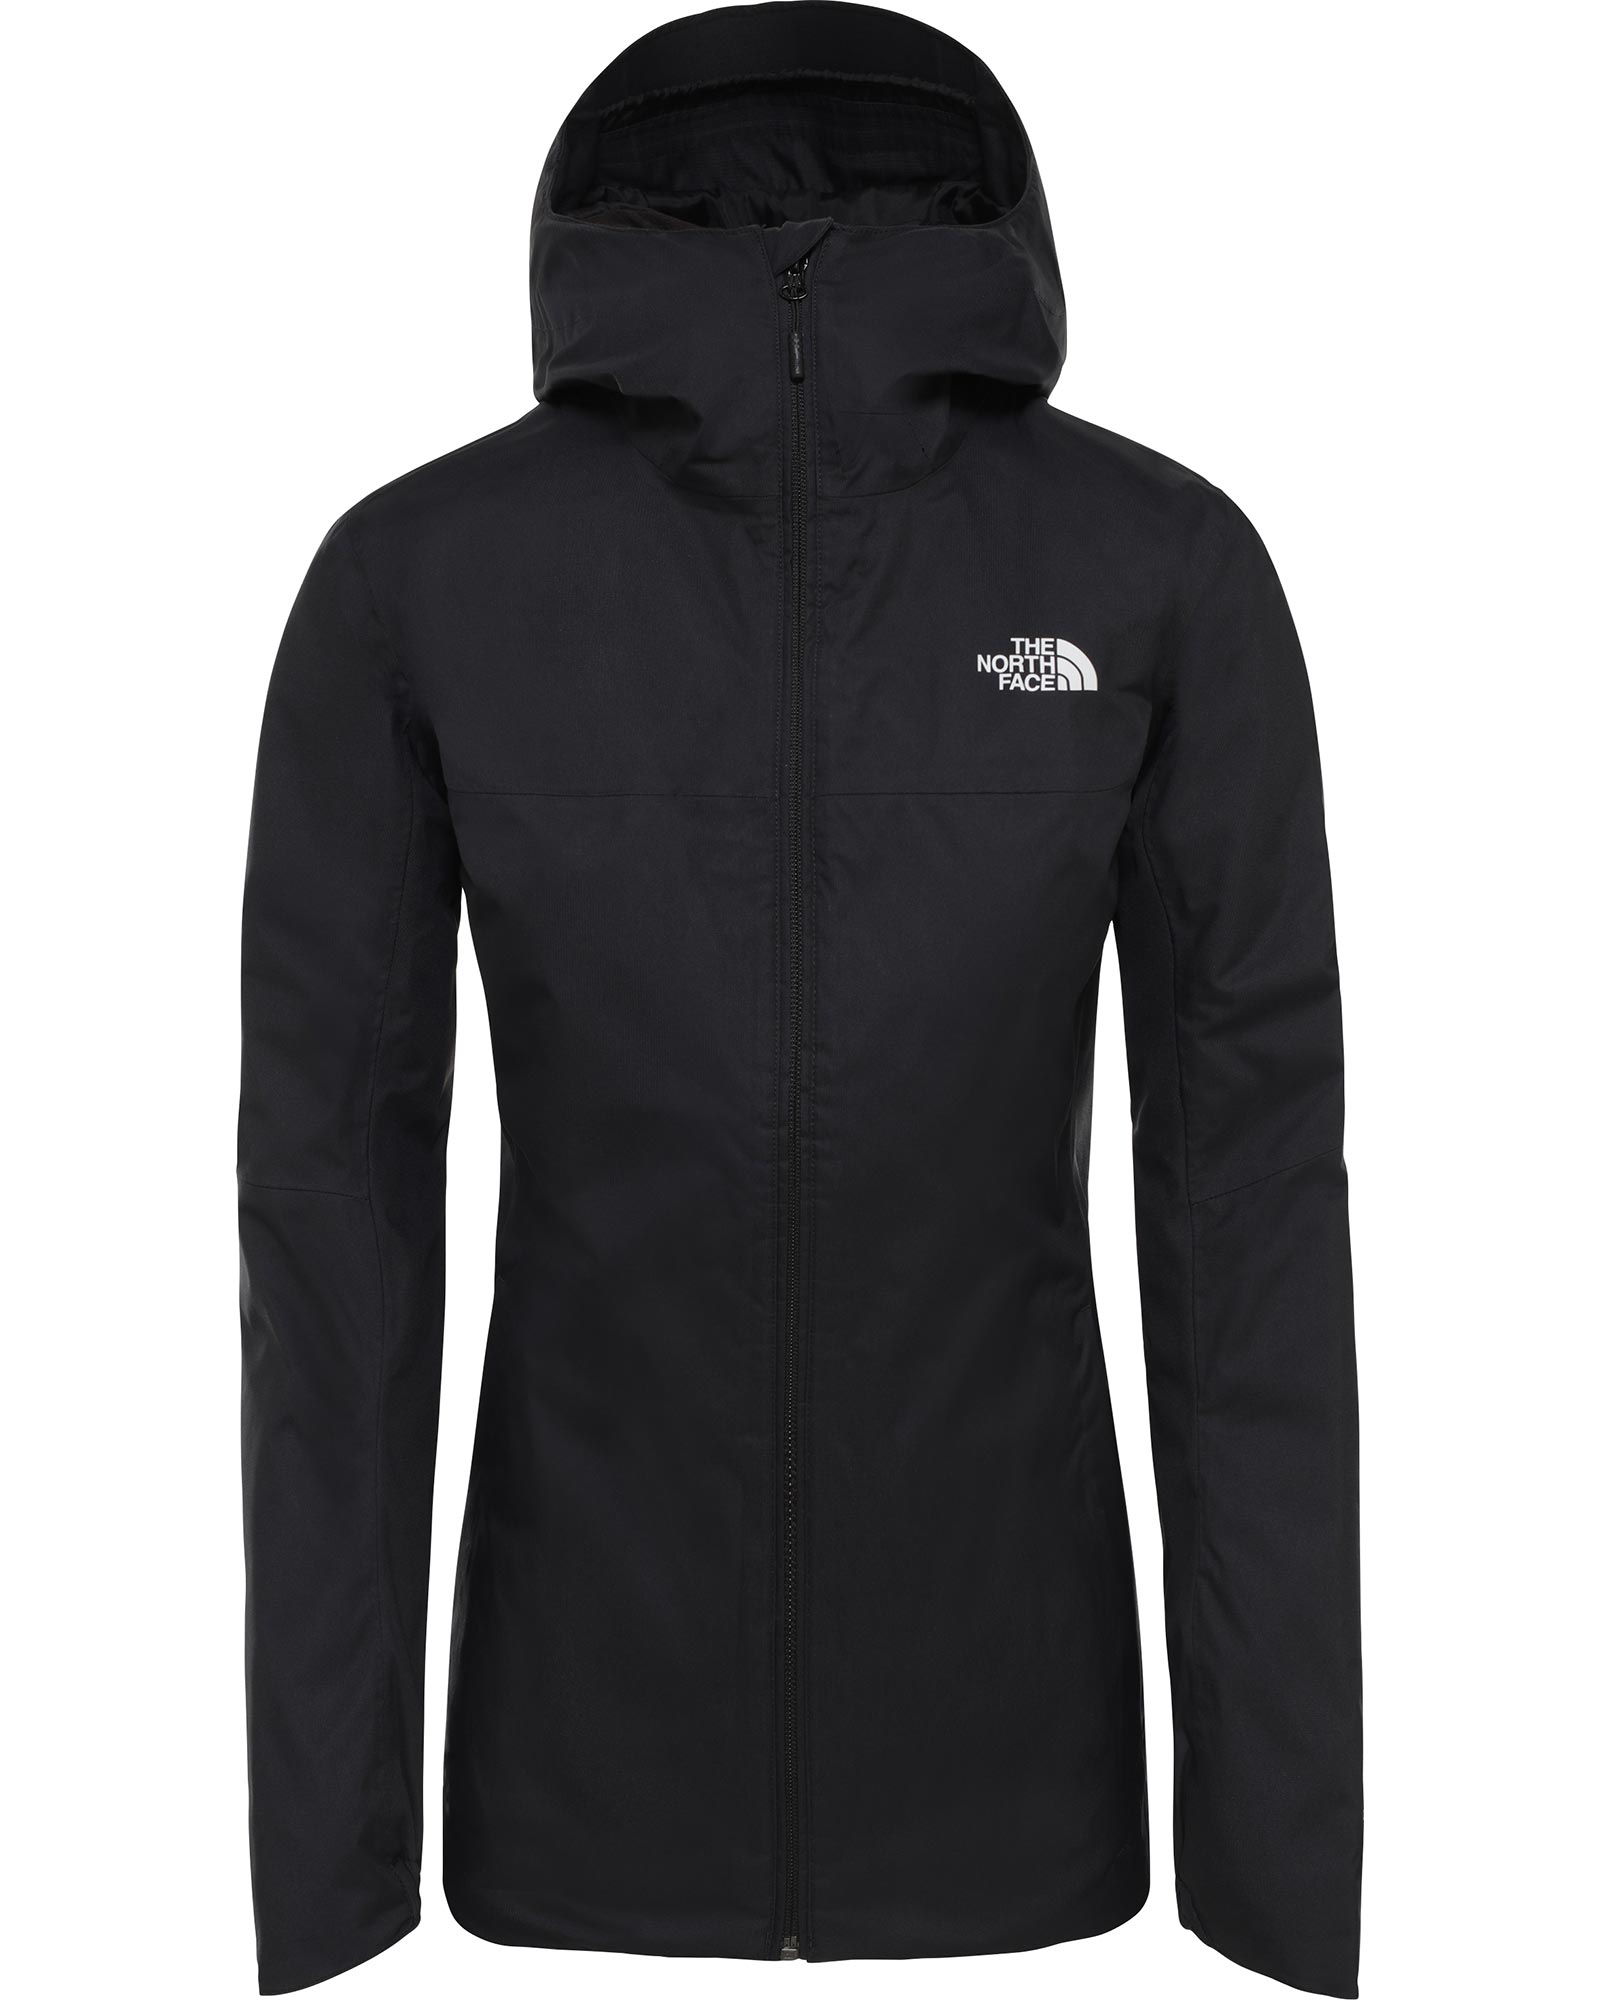 The North Face Quest DryVent Women’s Insulated Jacket - TNF Black XL